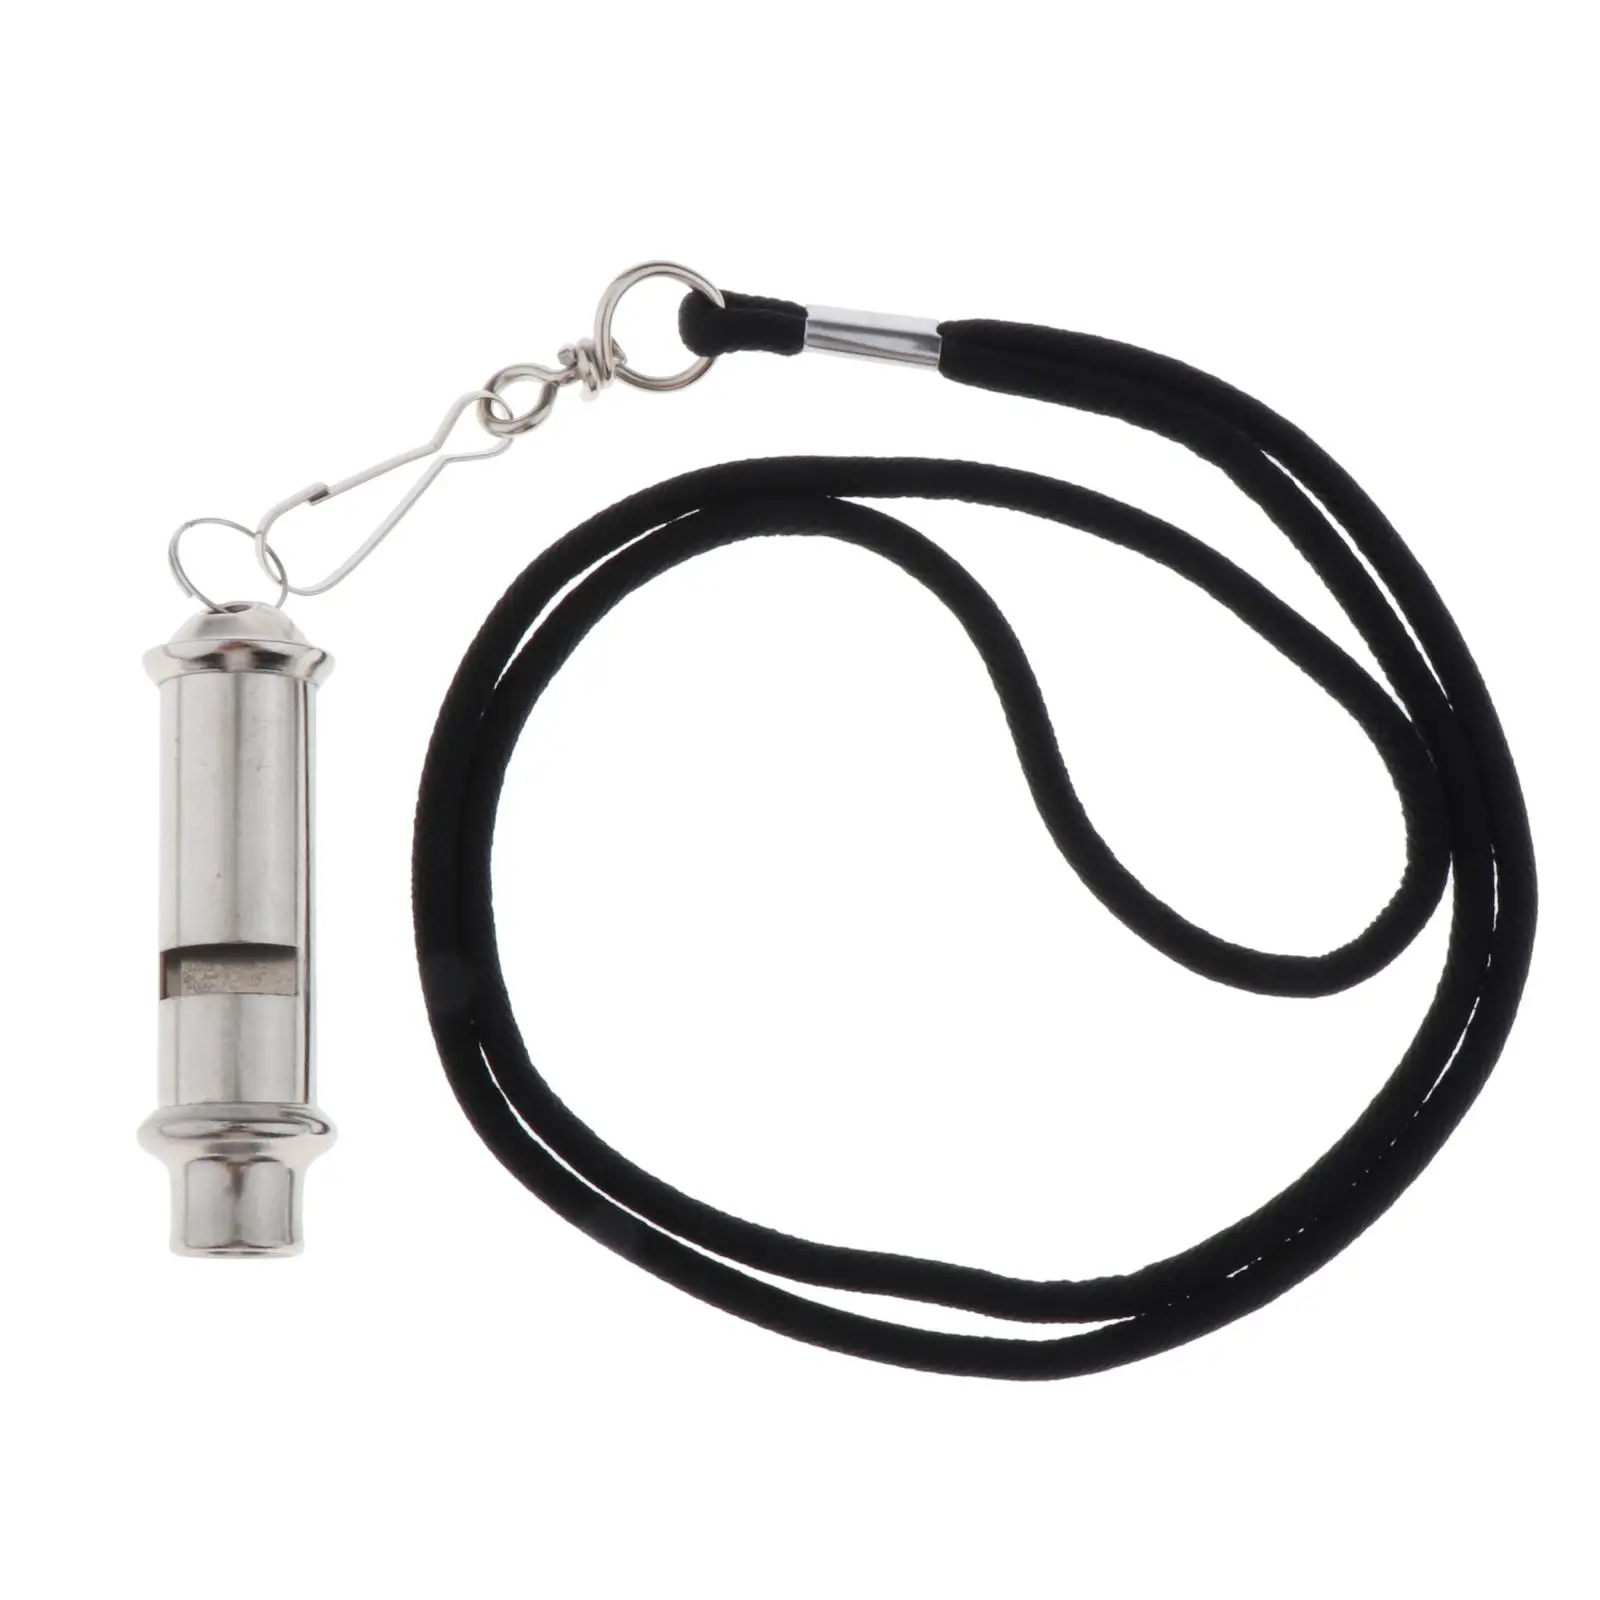 Dual Frequency Survival Emergency Whistle for Camping Hiking Sports Dog Training 